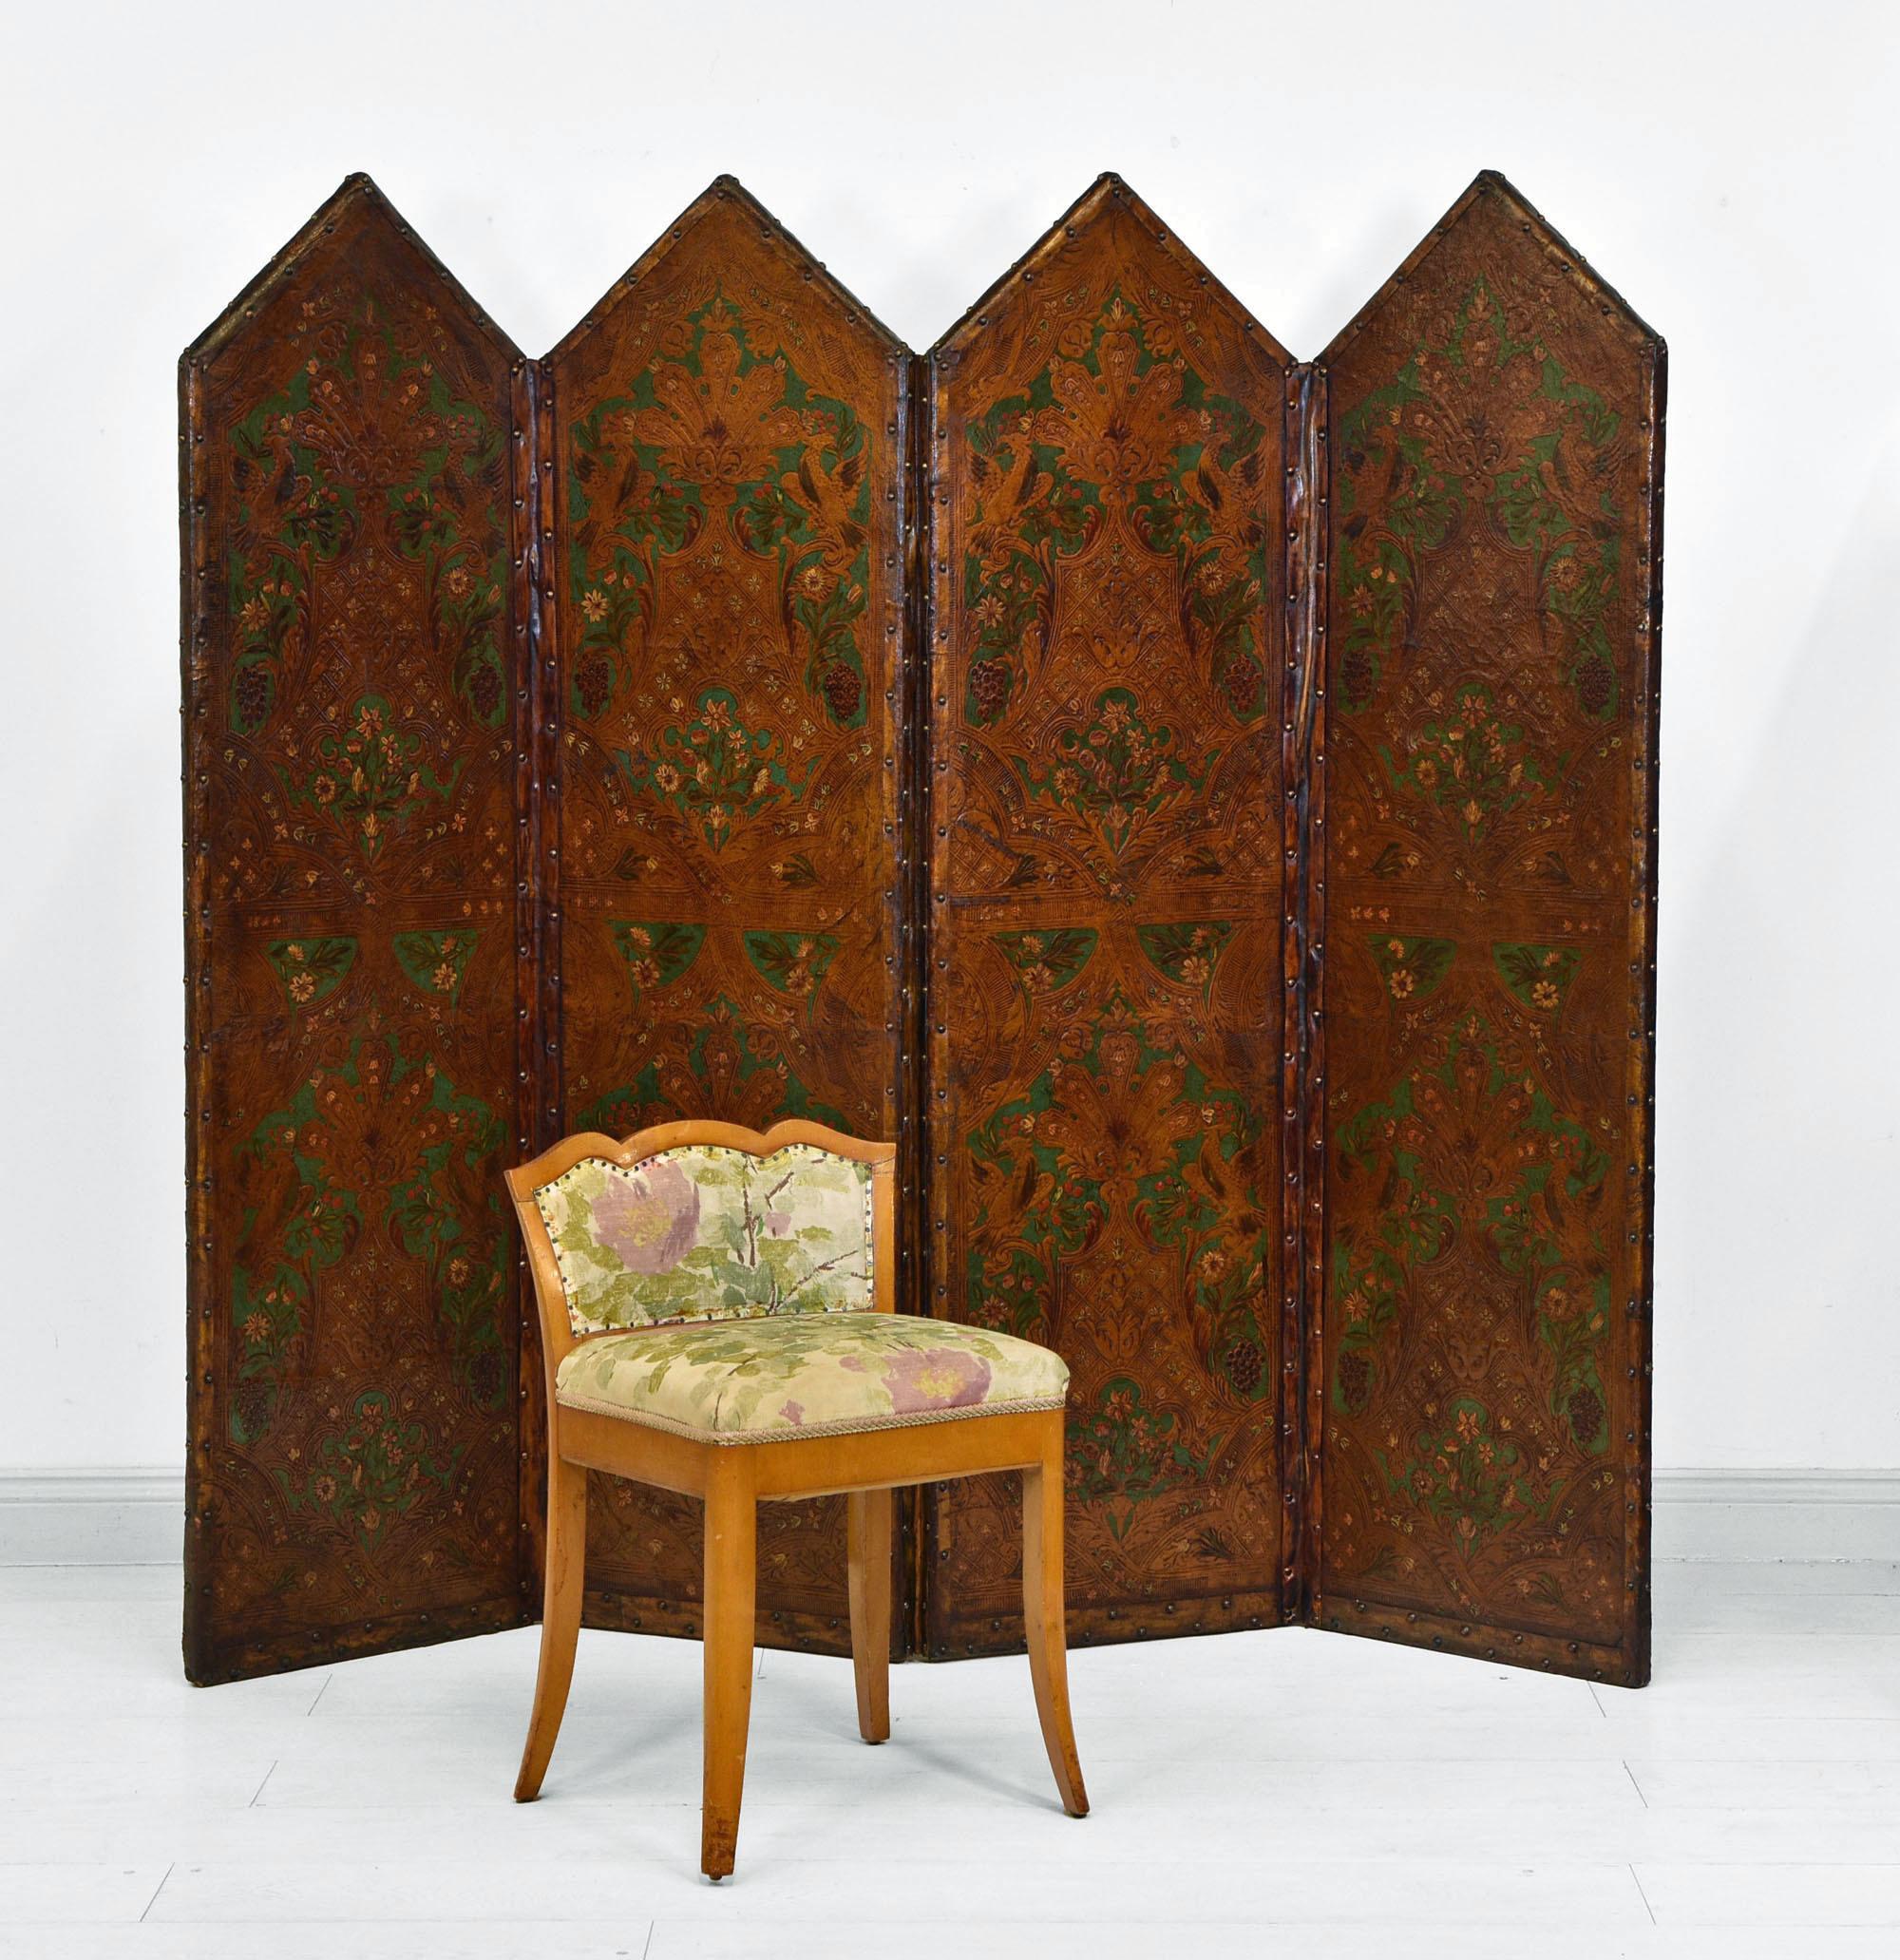 An antique leather embossed and hand painted four fold screen. Circa 1880.

With antique gold/rich umber tones and forest green in colour, it is decorated with mythological birds and classically embossed with hand painted floral decoration.